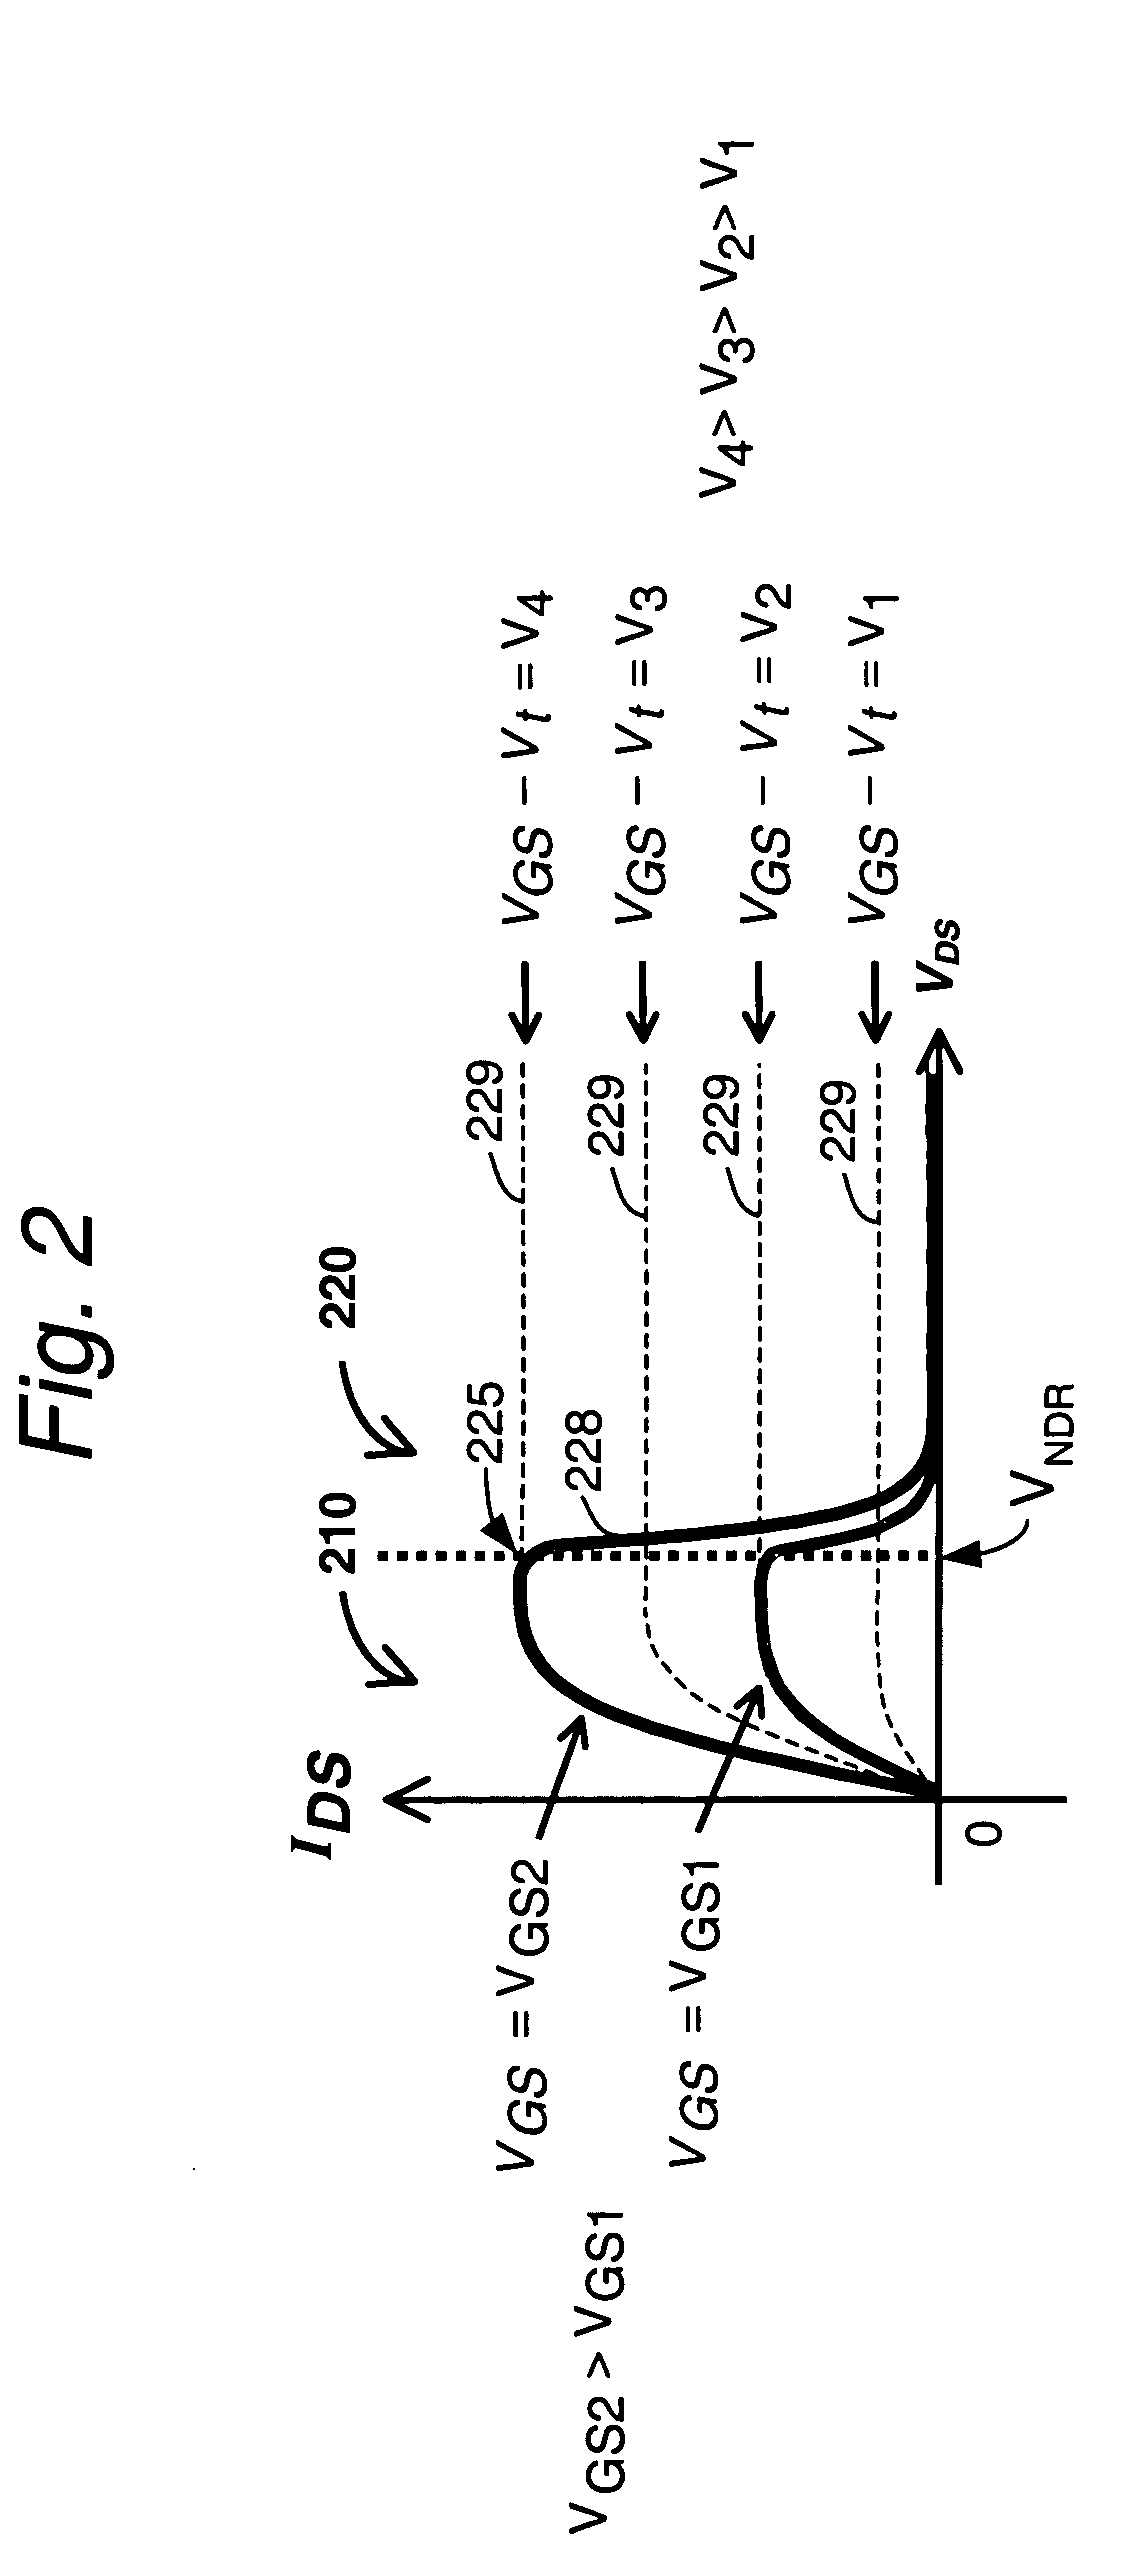 Methods of testing/stressing a charge trapping device